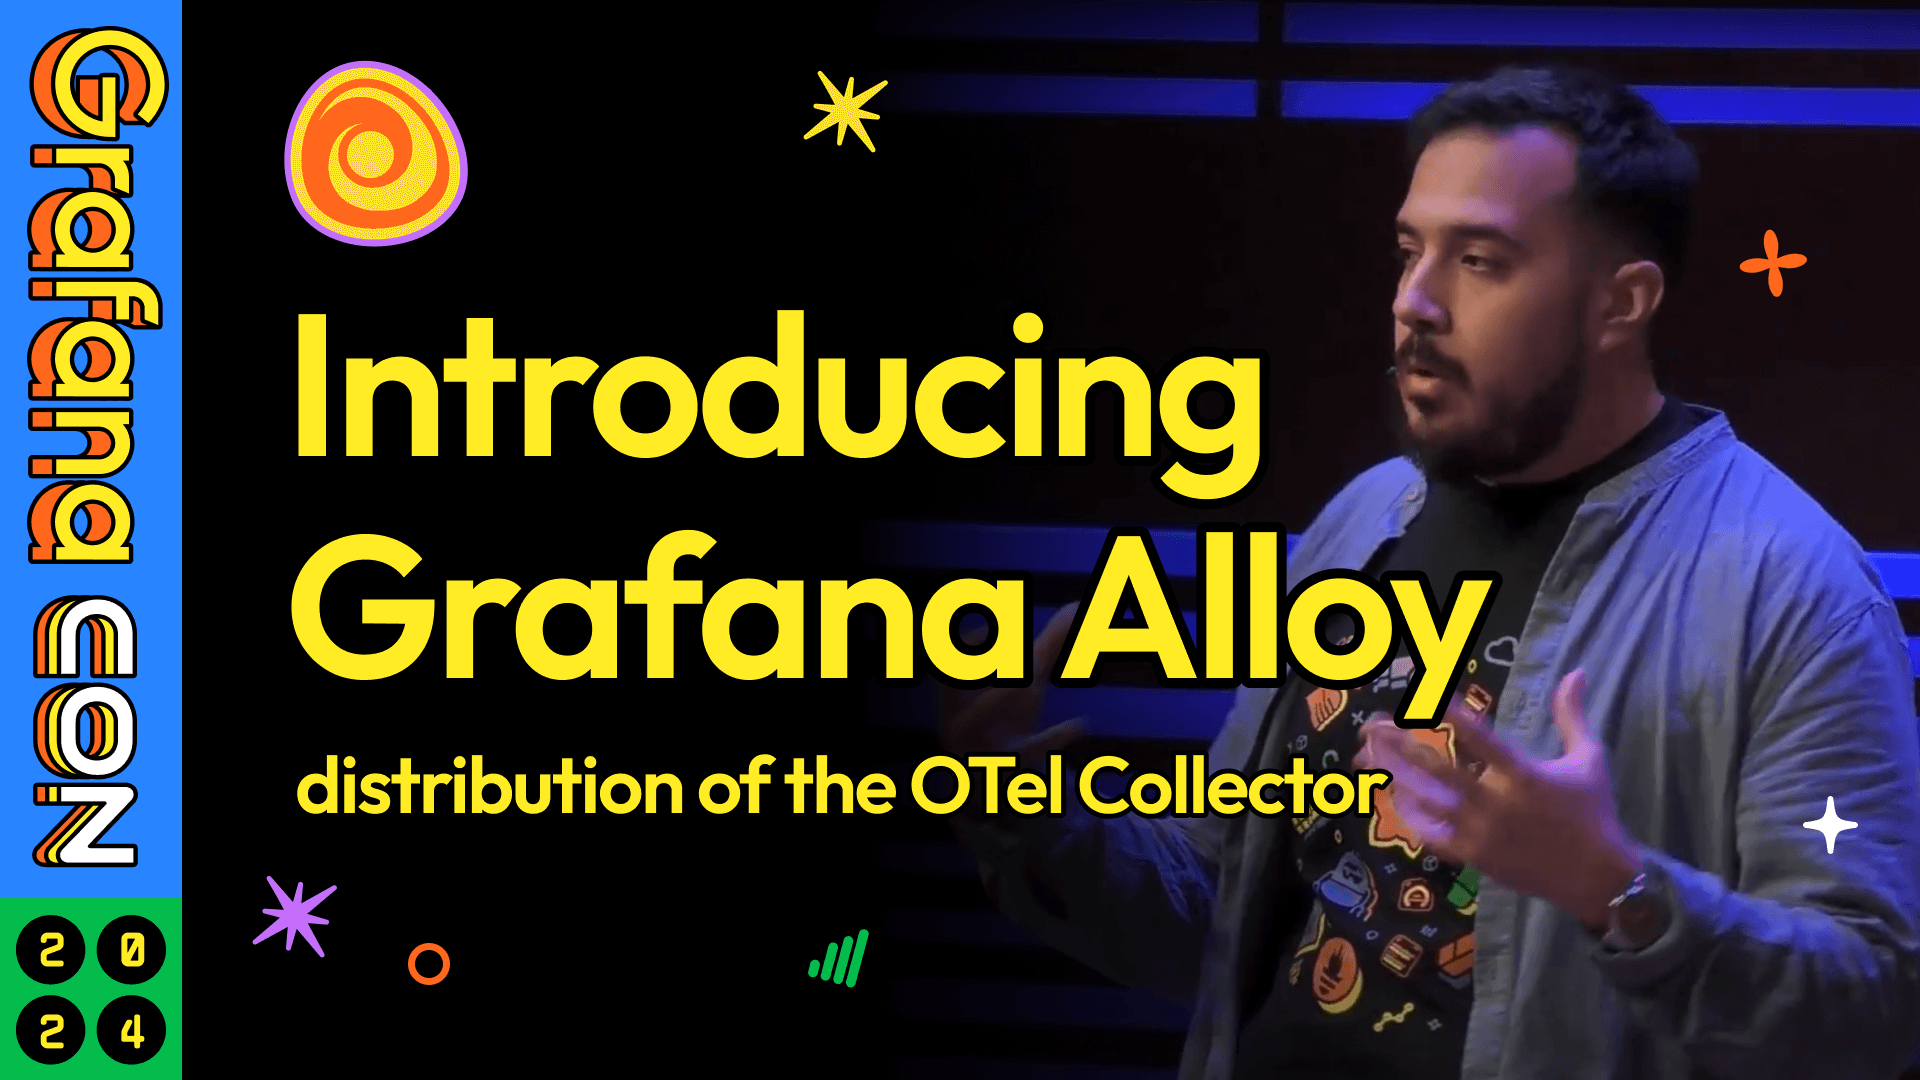 Introducing Grafana Alloy, a distribution of the OTel Collector